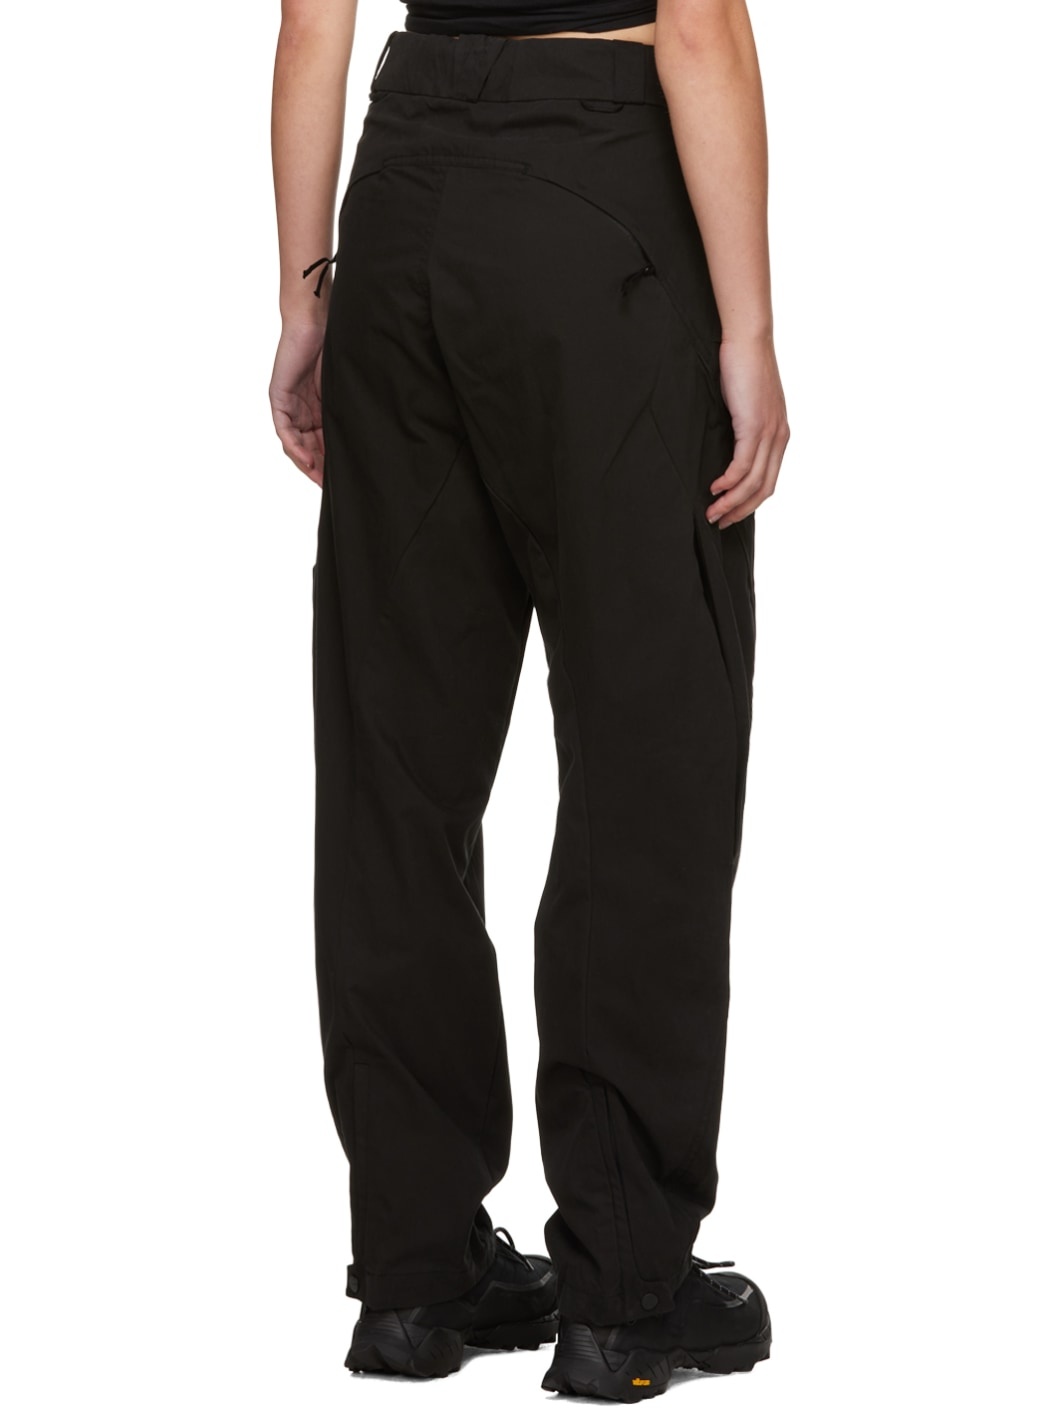 Black Vented Trousers - 3